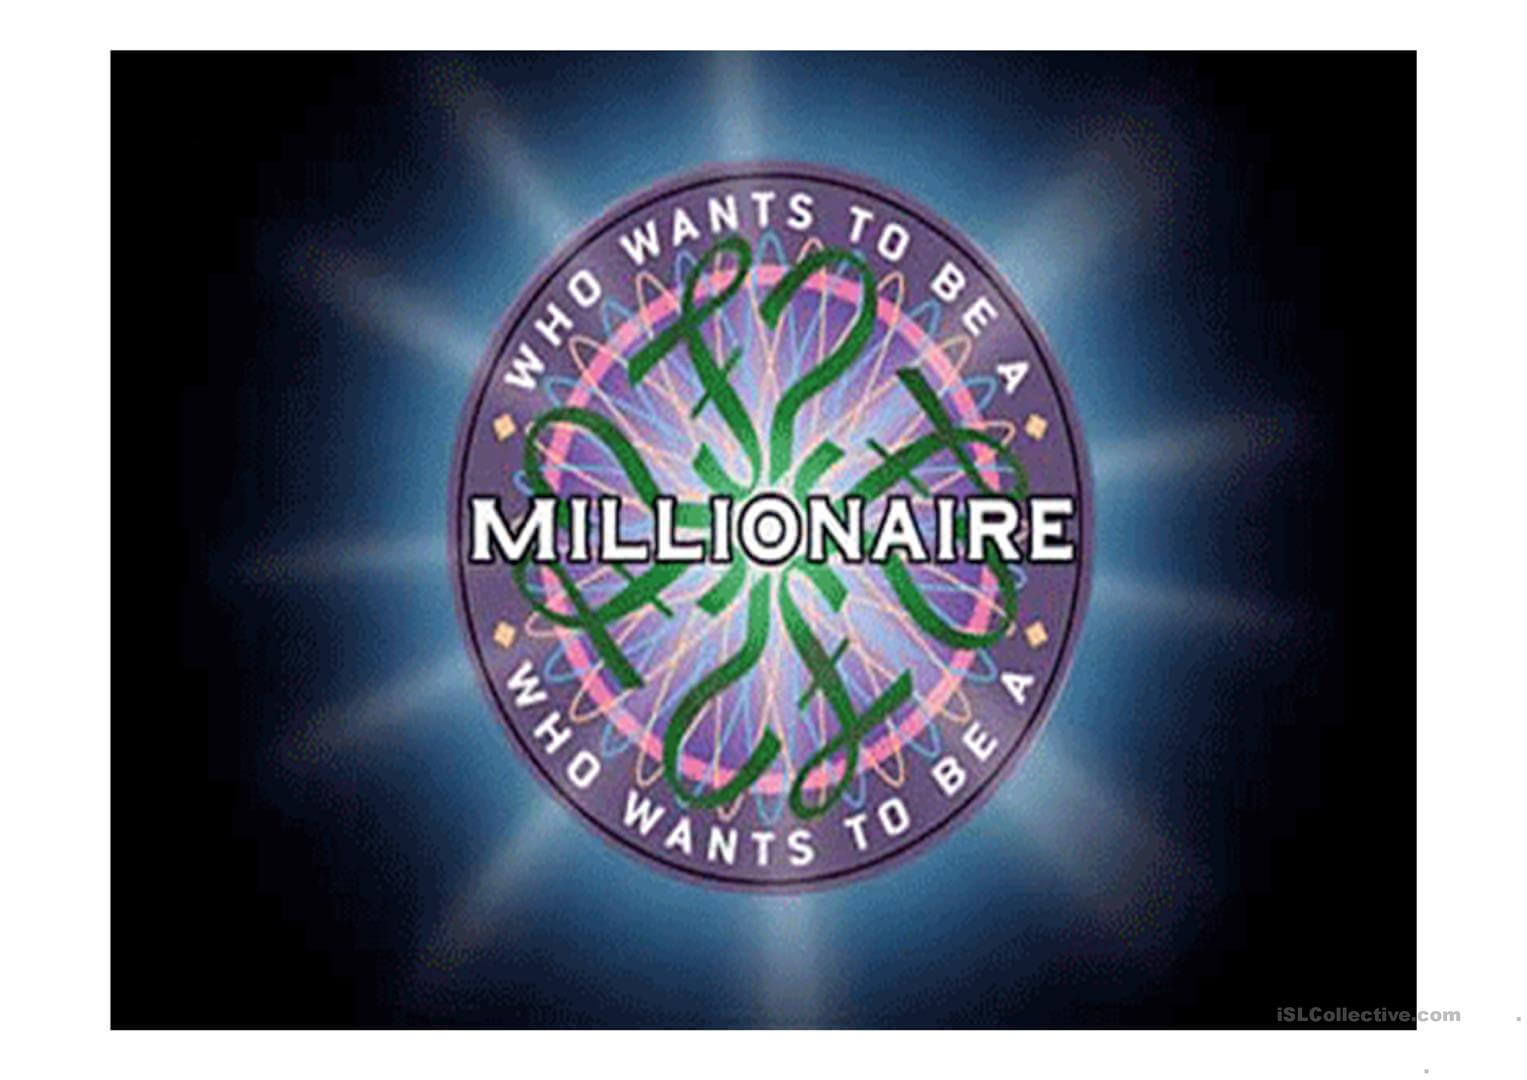 English Esl Millionaire Powerpoint Presentations – Most Throughout Who Wants To Be A Millionaire Powerpoint Template